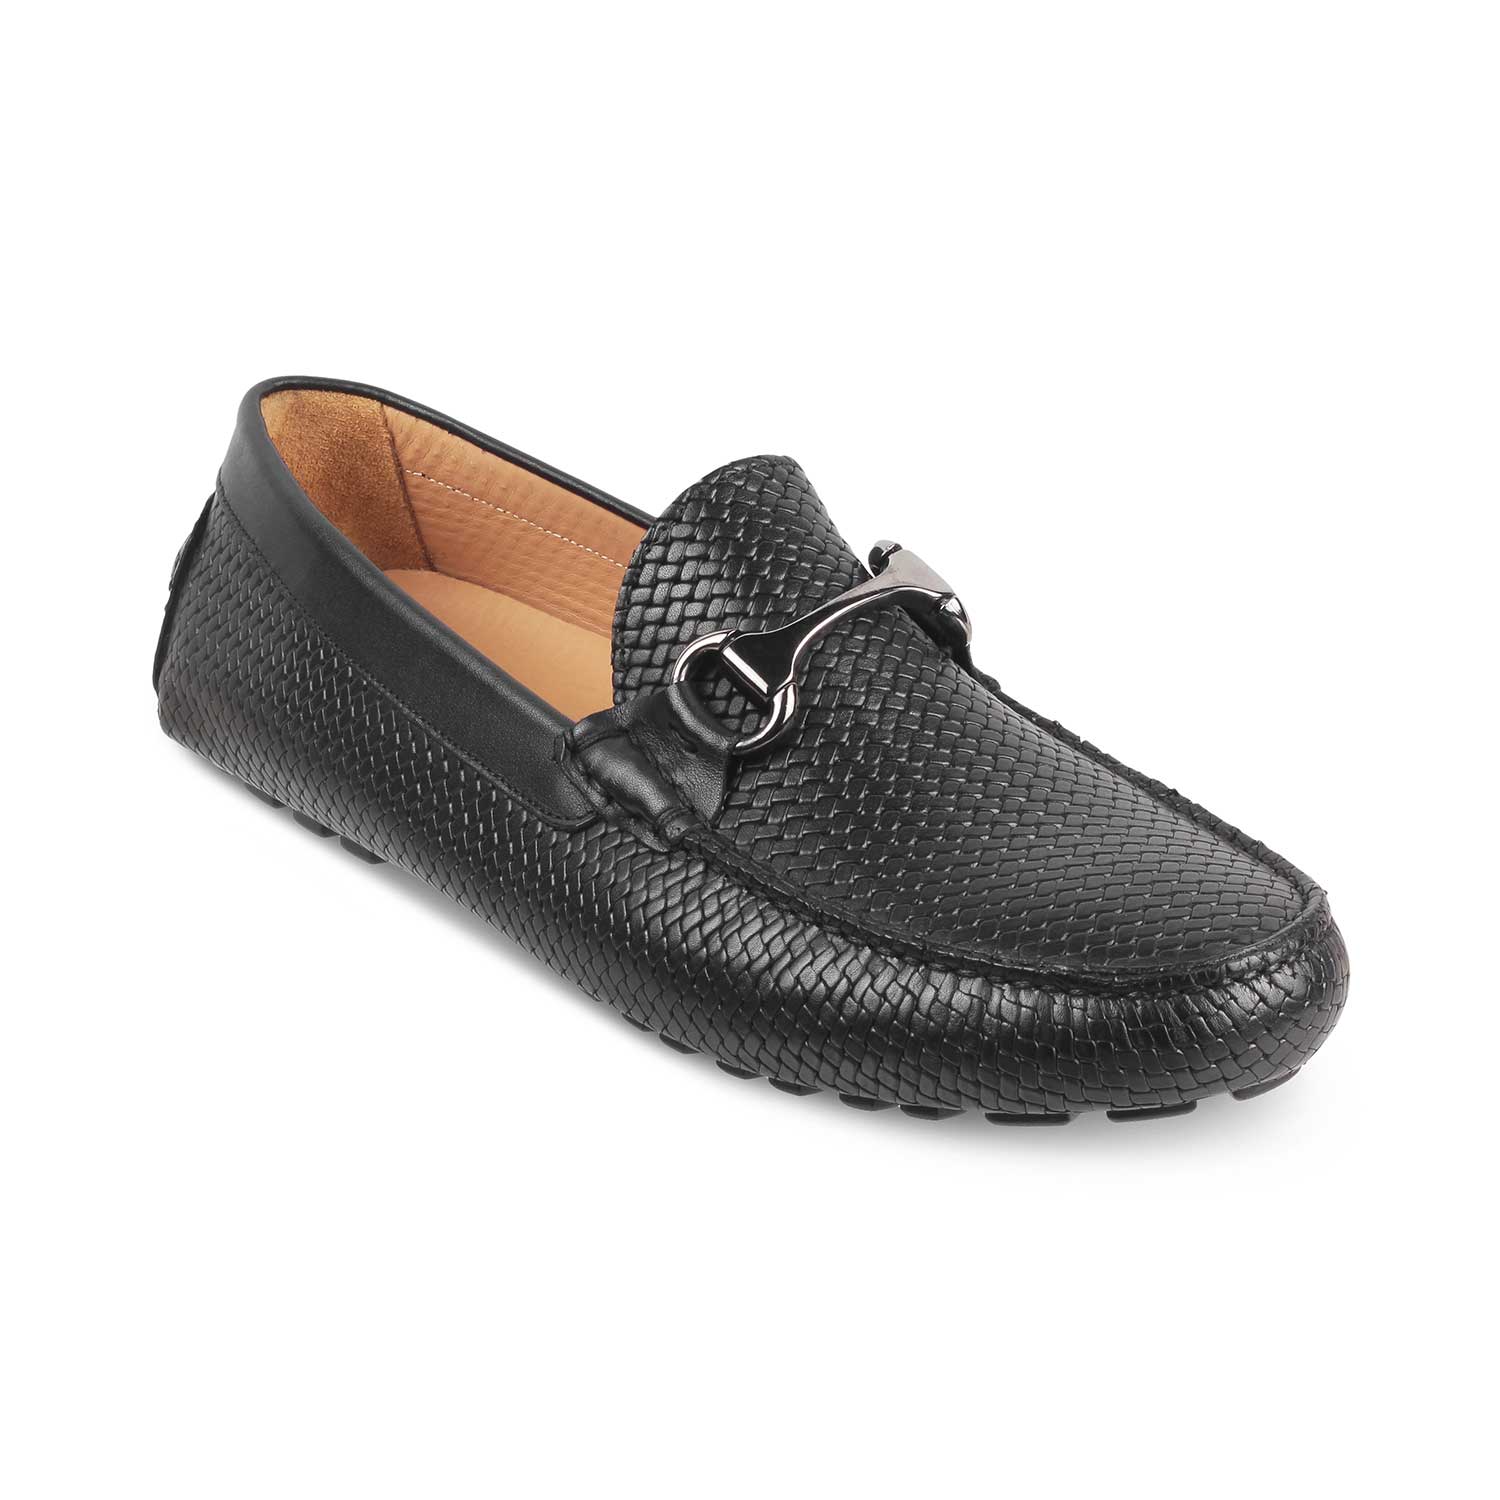 Tresmode-The Monaco-2 Black Men's Handcrafted Leather Driving Loafers Tresmode-Tresmode